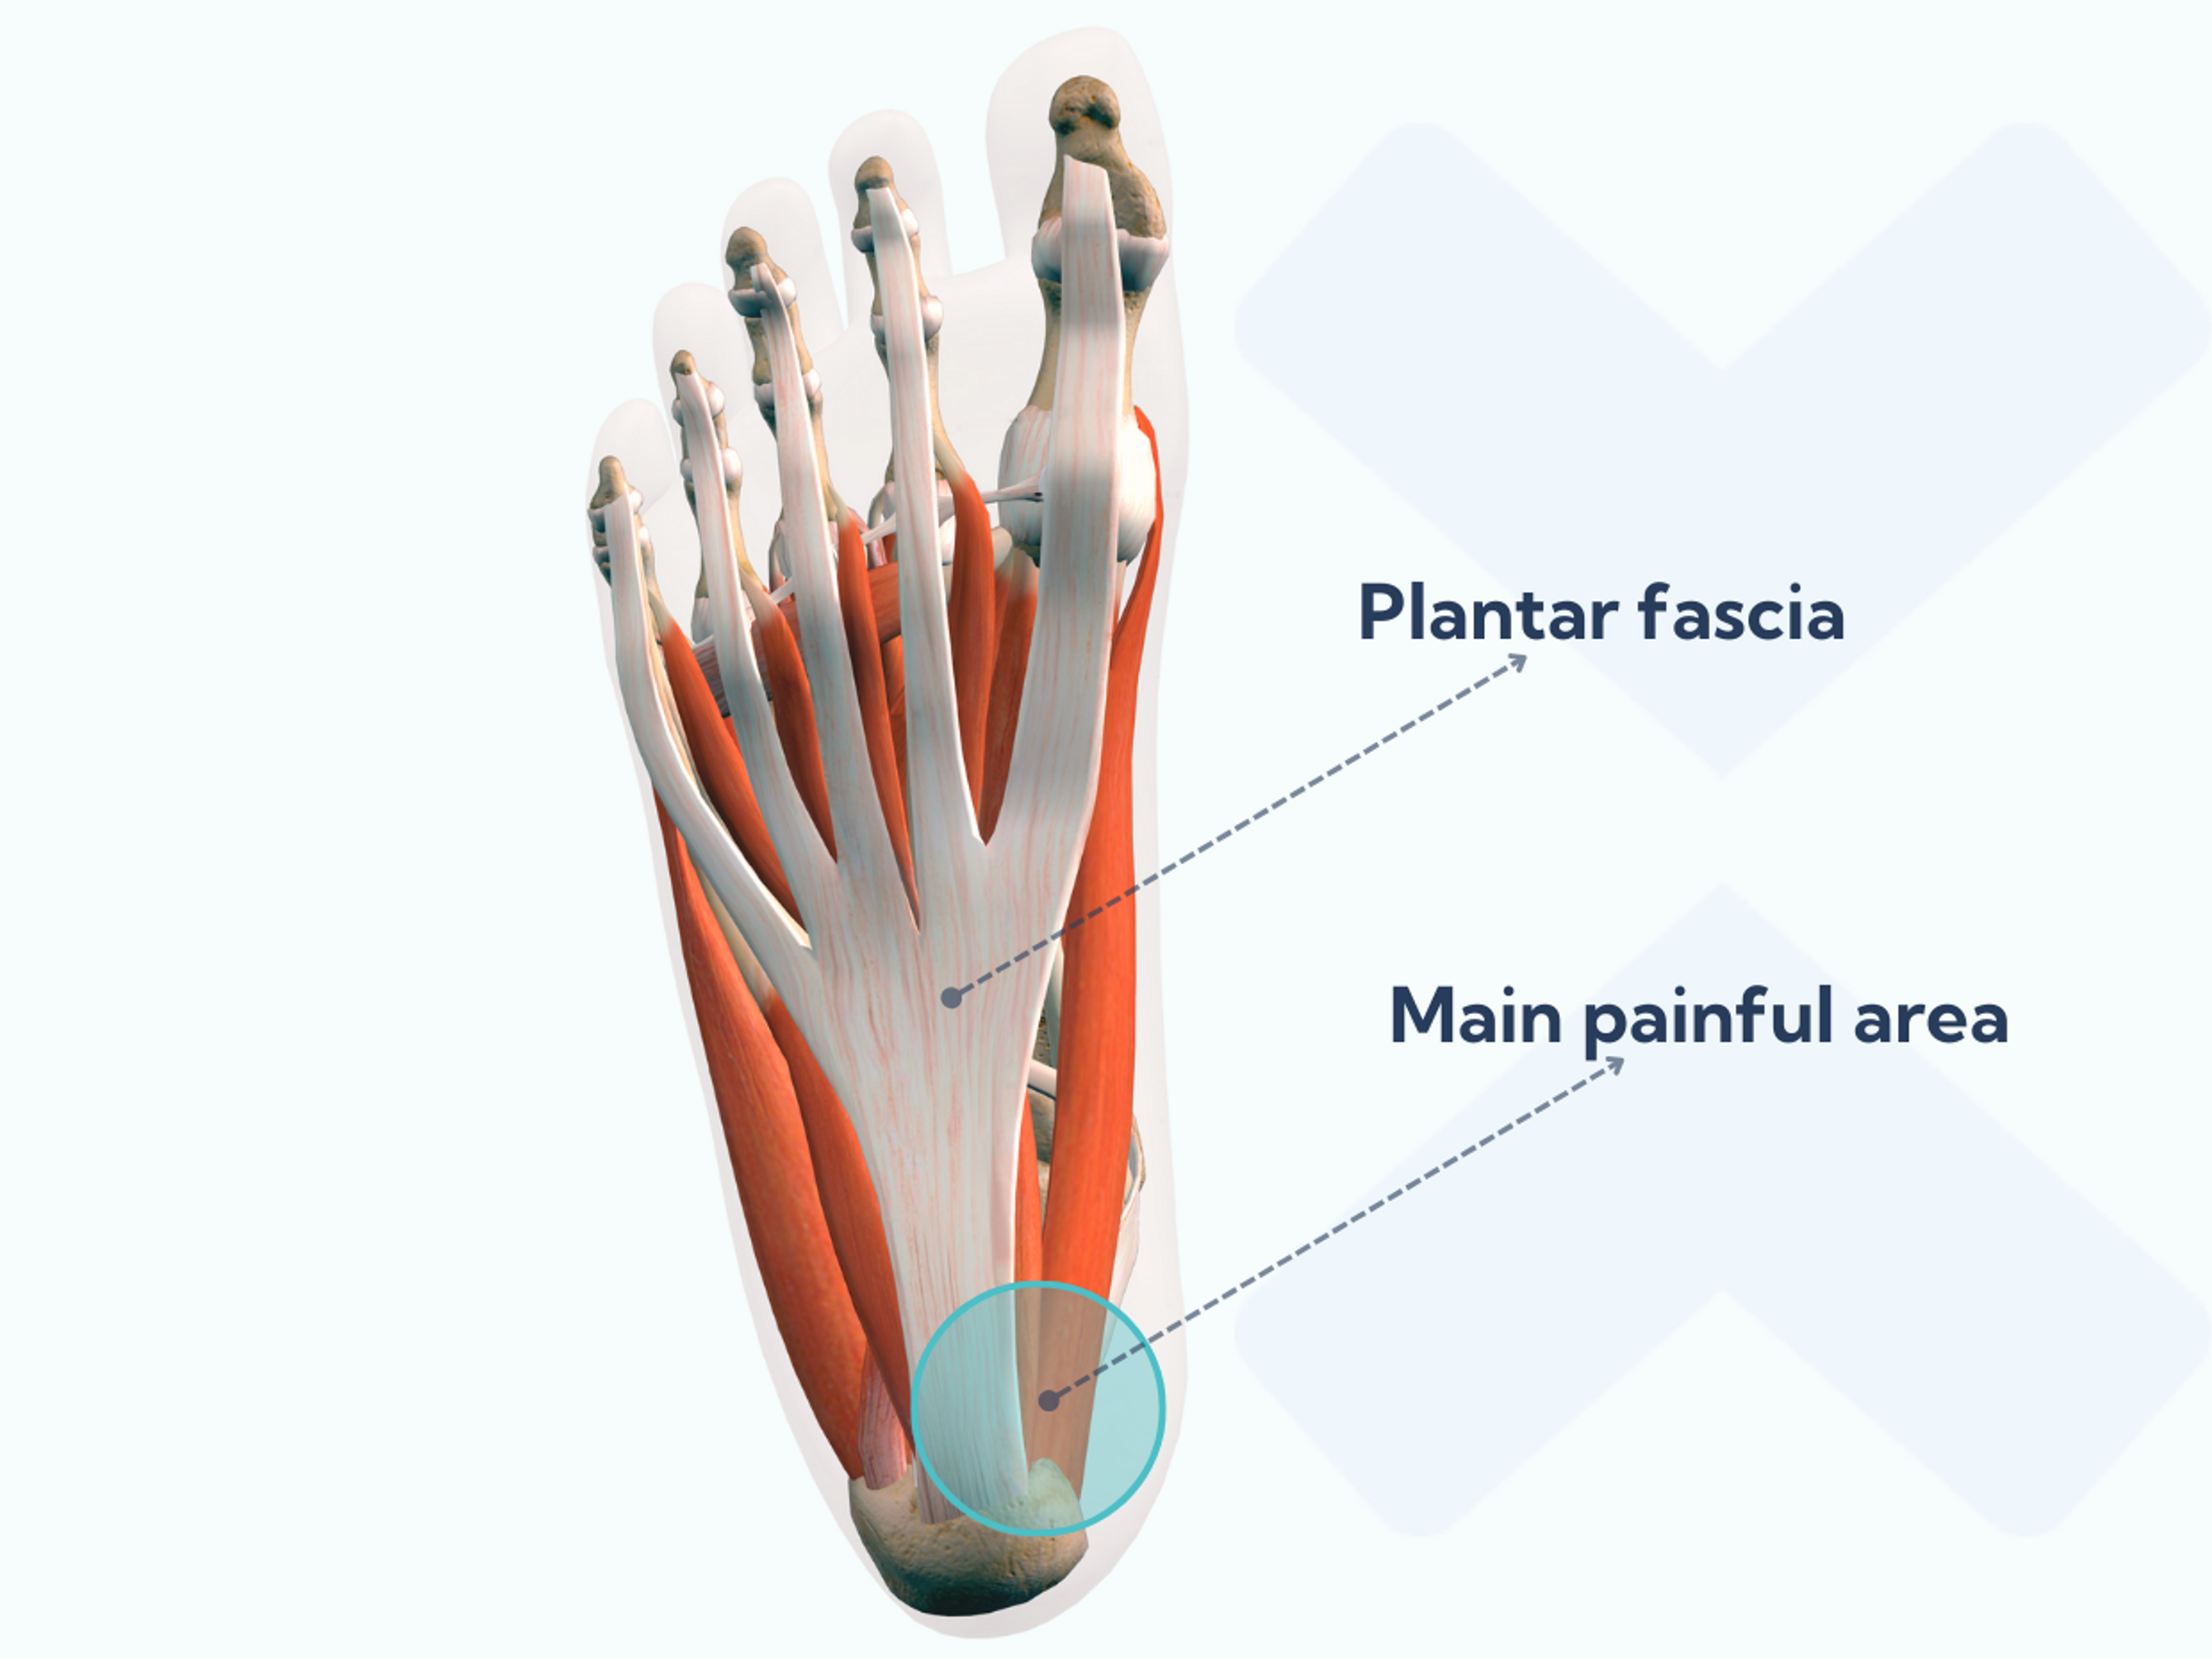 When you have plantar fasciitis, you feel the most pain under your foot, close to the inner back border of your foot arch and heel.